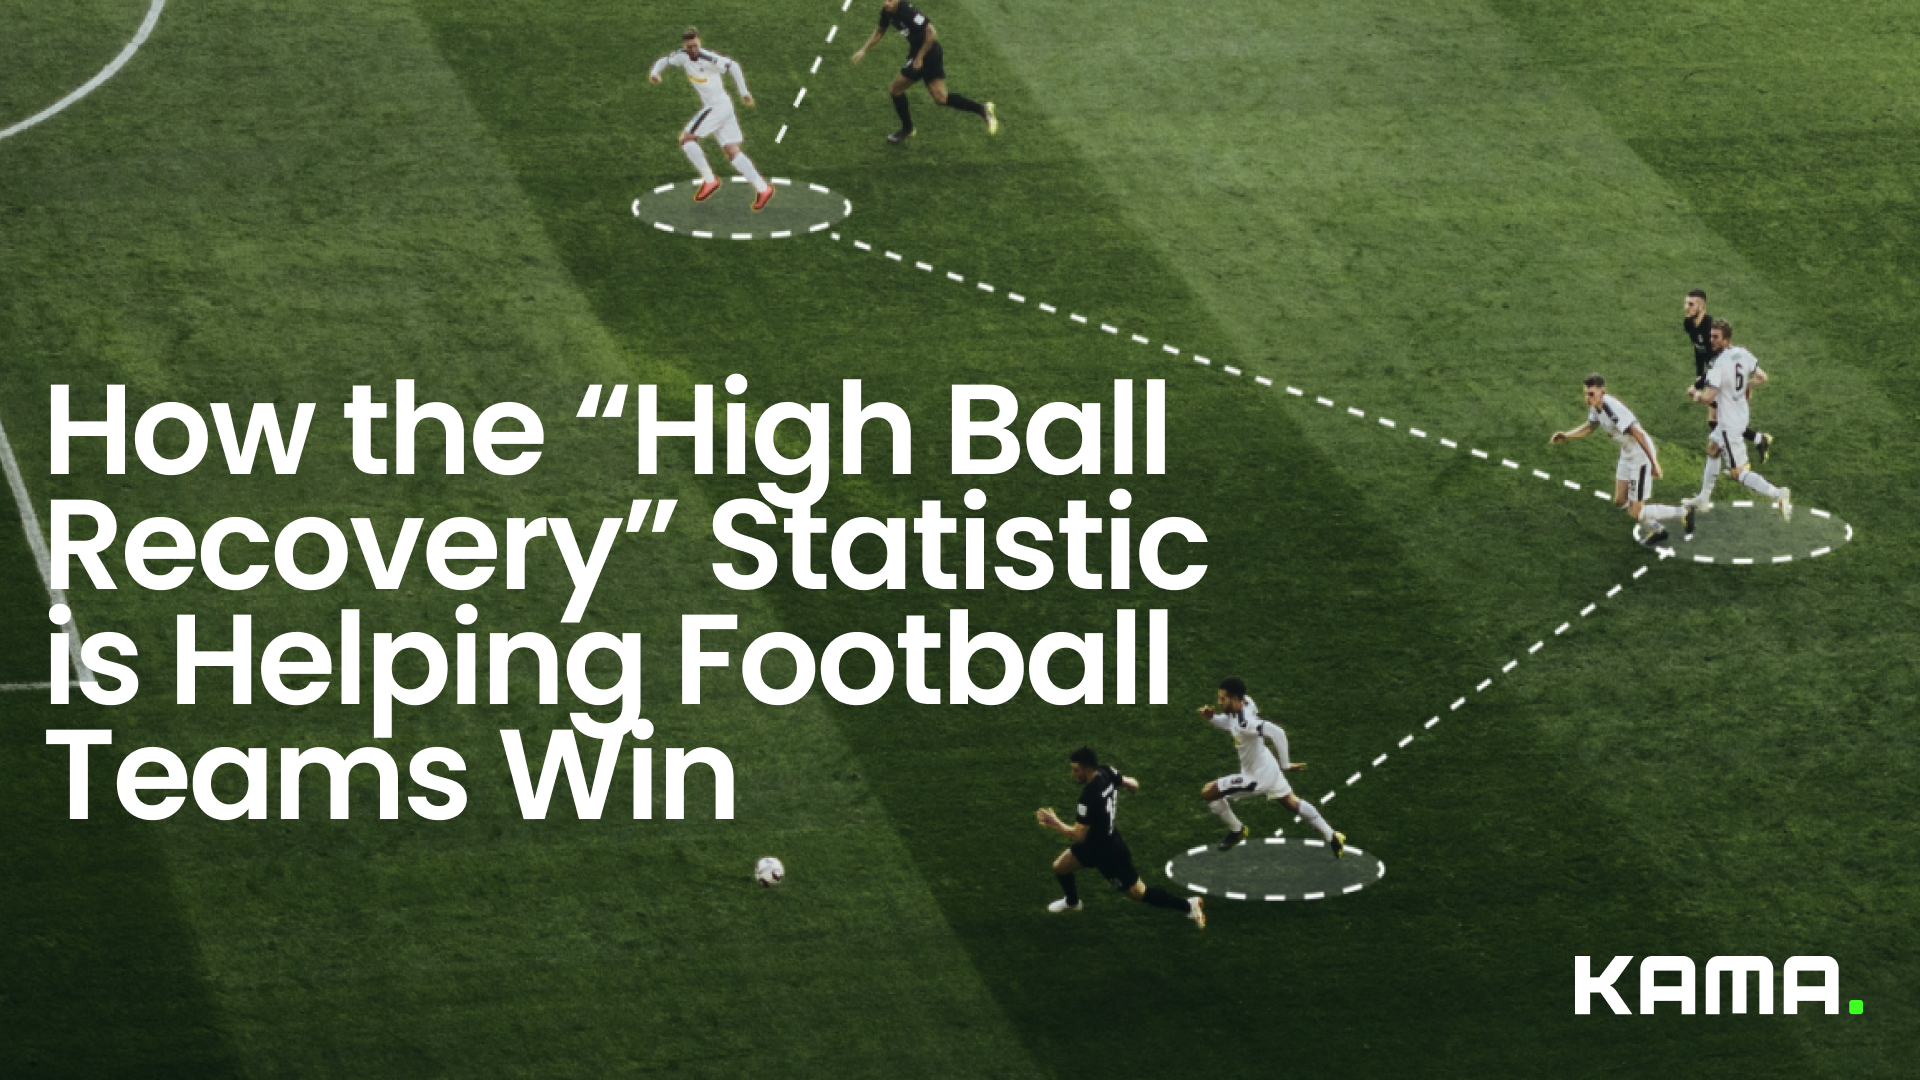 Kama sport How the “High Ball Recovery” Statistic is Helping Football Teams Win
